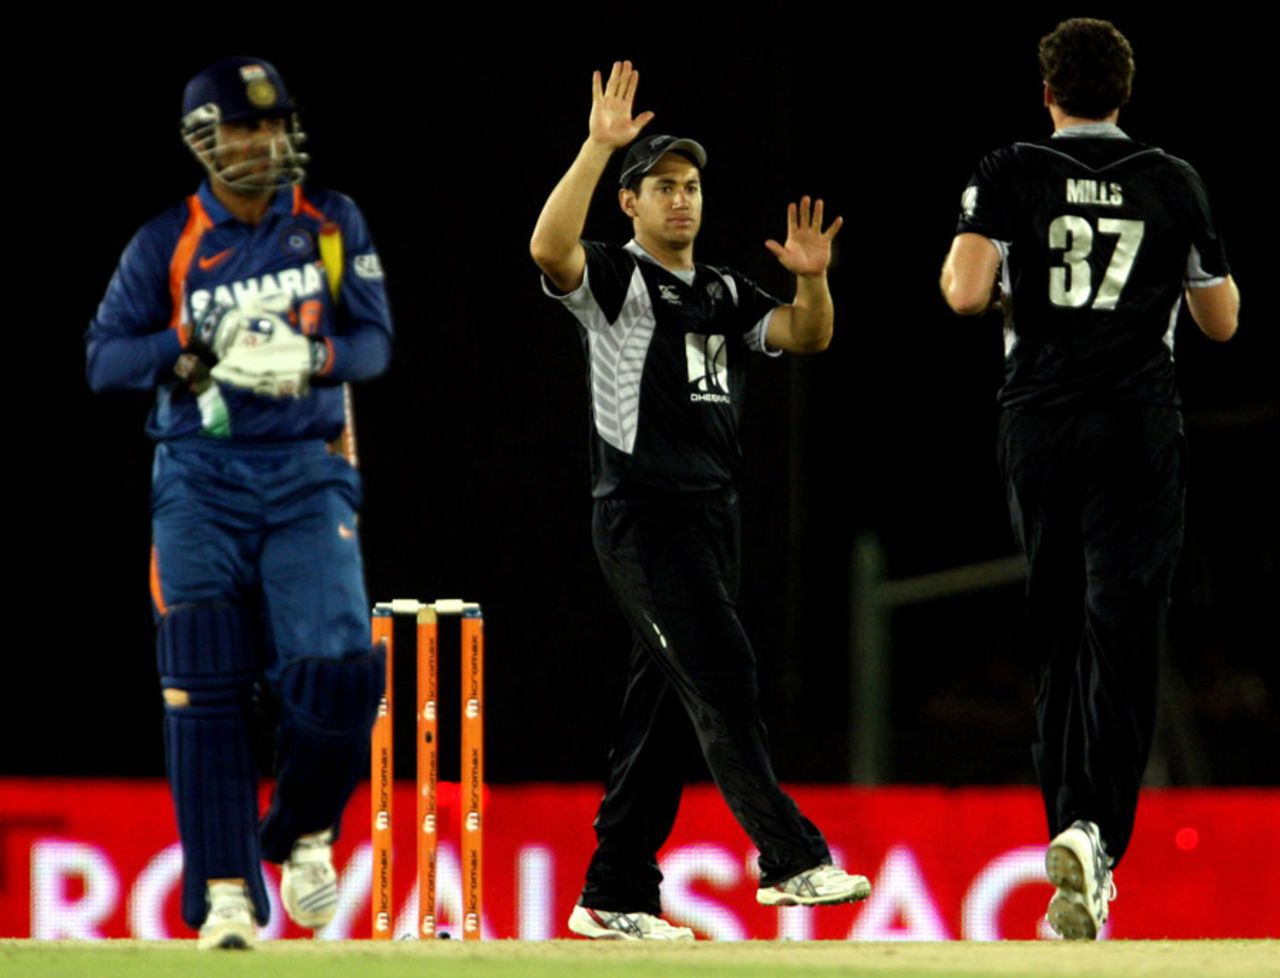 Kyle Mills got Virender Sehwag early, India v New Zealand, tri-series, 1st ODI, August 10, 2010